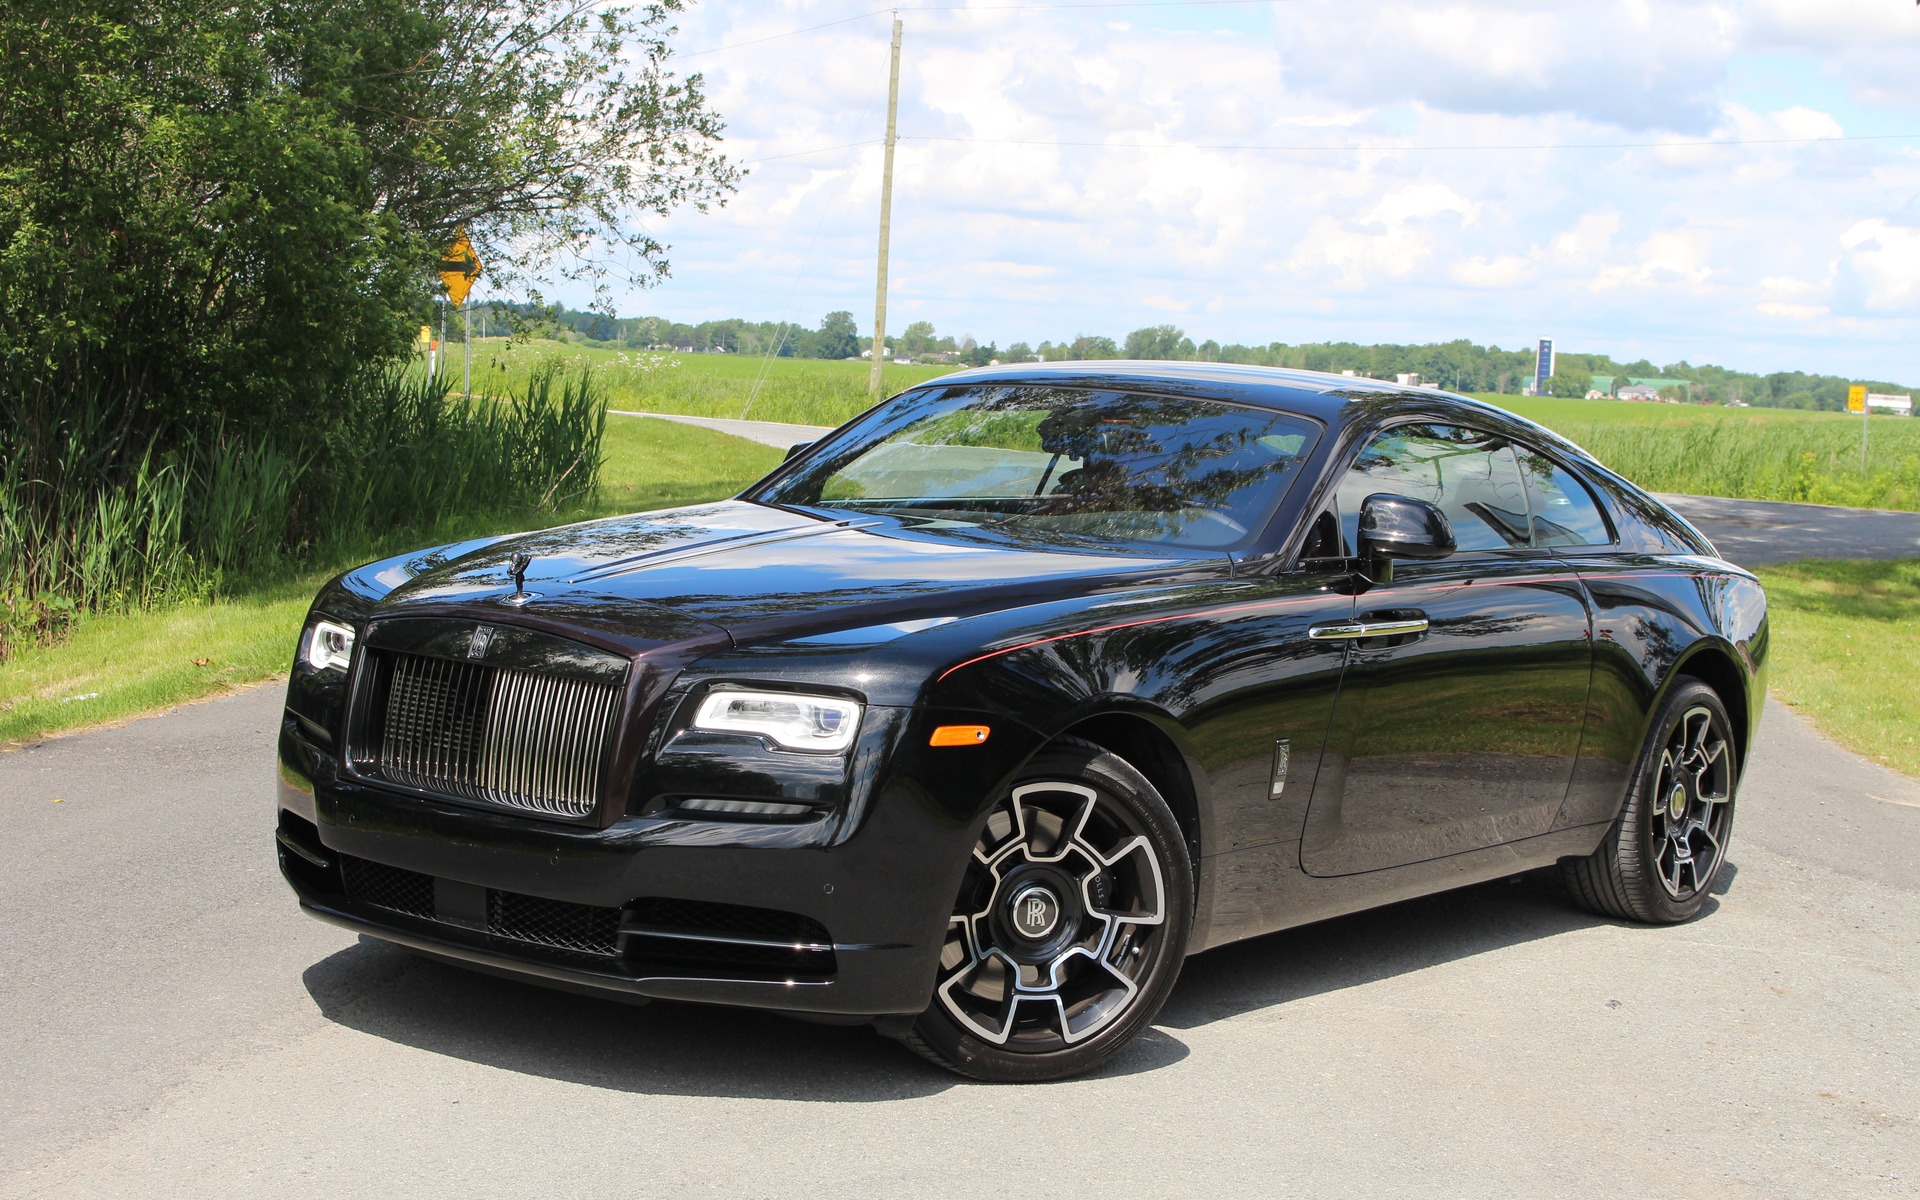 2017 RollsRoyce Ghost for Sale with Photos  CARFAX